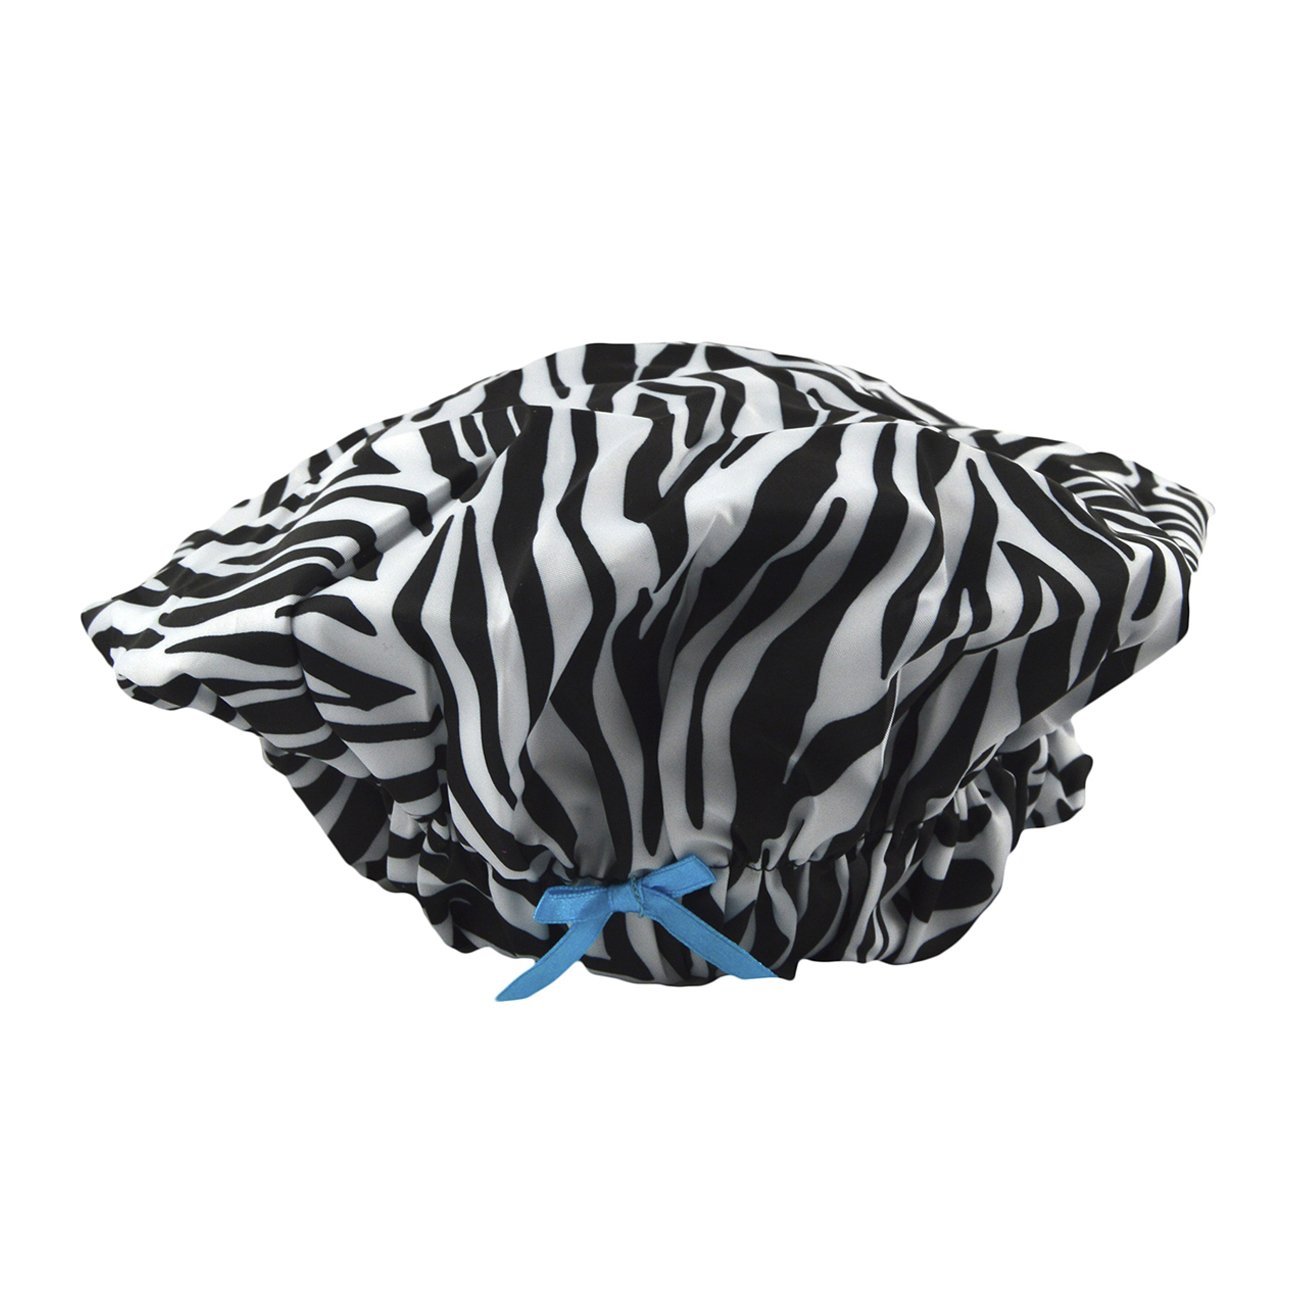 Reusable Shower Cap & Bath Cap & Lined, Oversized Waterproof Shower Caps Large Designed for all Hair Lengths with PEVA Lining & Elastic Band Stretch Hem Hair Hat - Fashionista Sassy Stripes